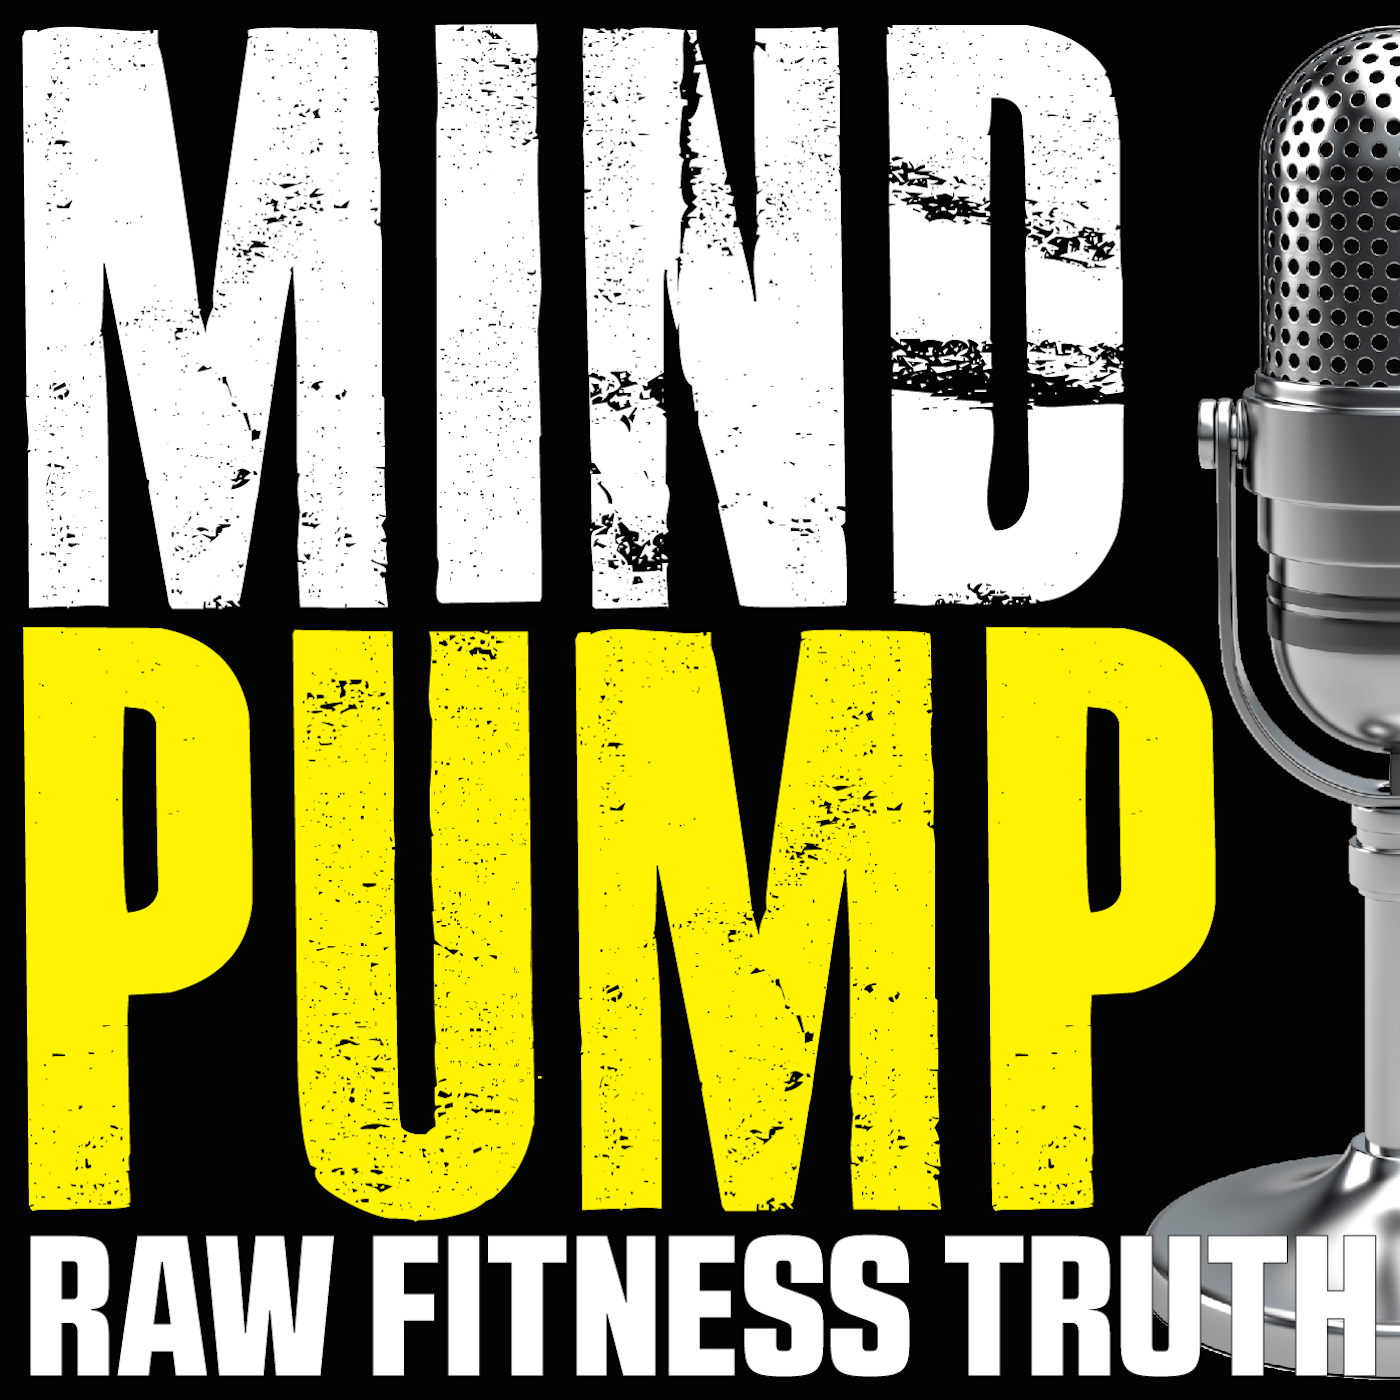 306: Building Muscle While Losing Fat, Hair Loss, CrossFit Style Training & MORE